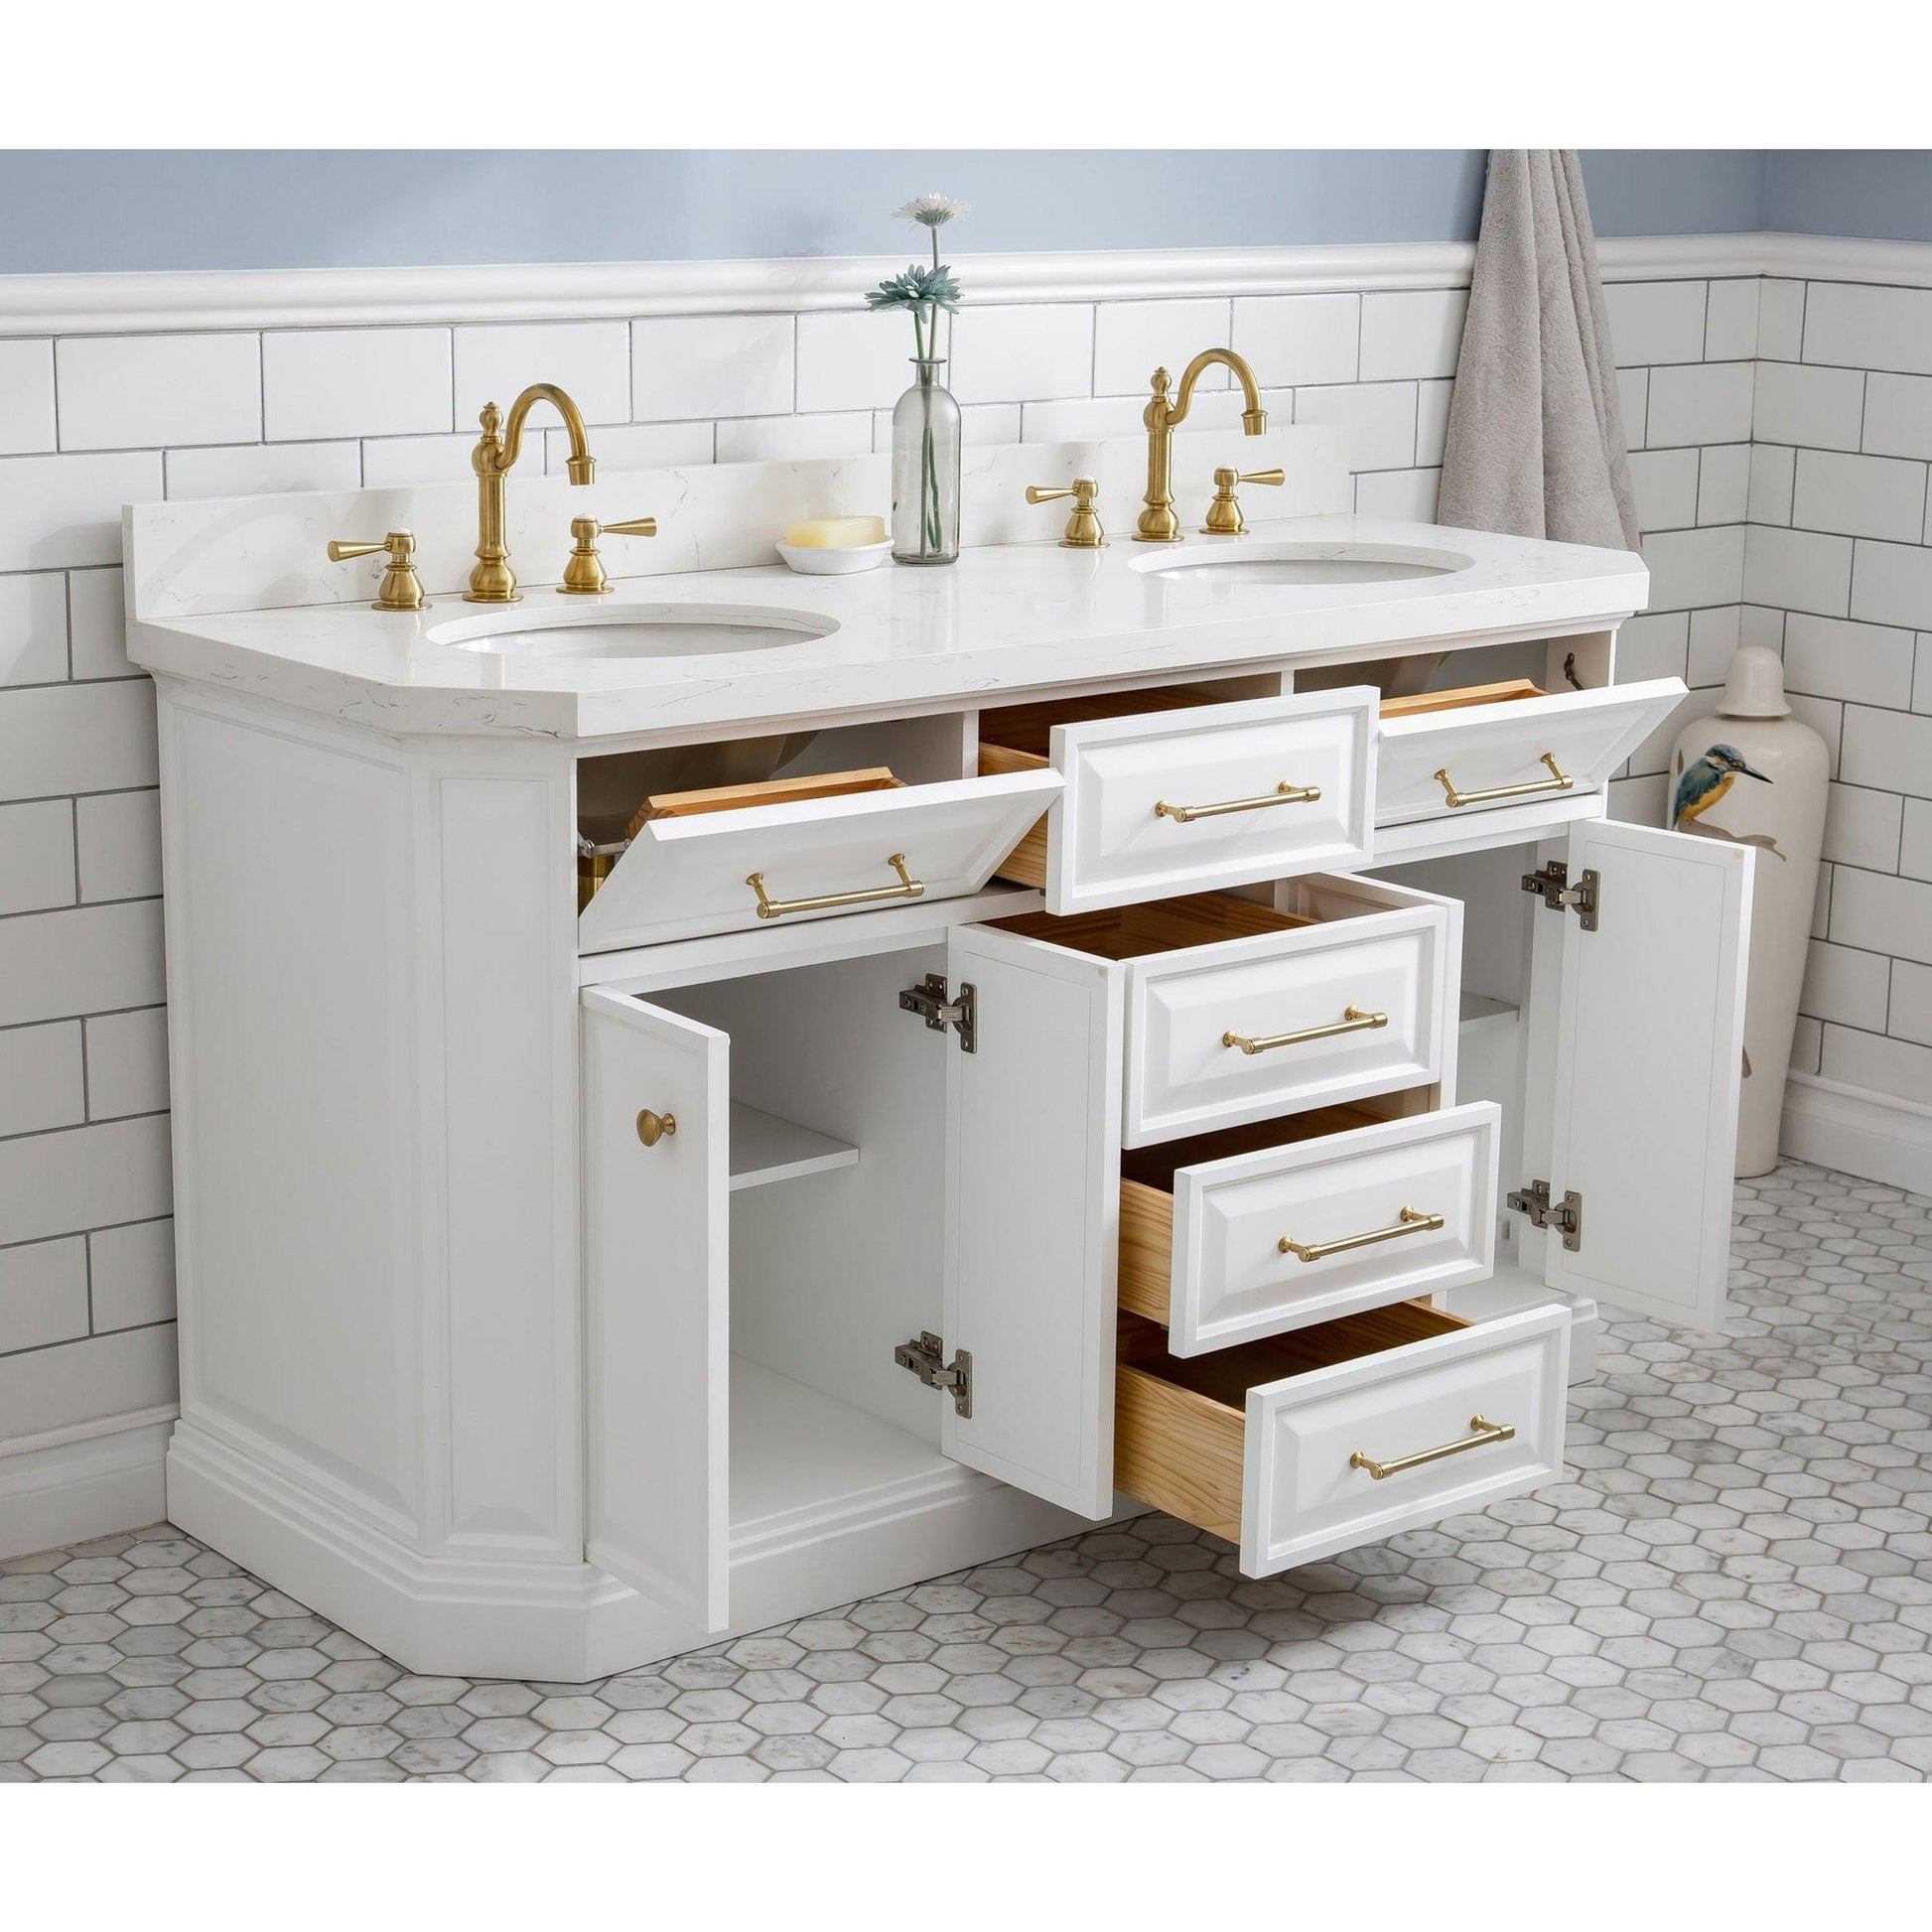 Water Creation Palace 60" Quartz Carrara Pure White Bathroom Vanity Set With Hardware And F2-0012 Faucets in Satin Gold Finish And Only Mirrors in Chrome Finish